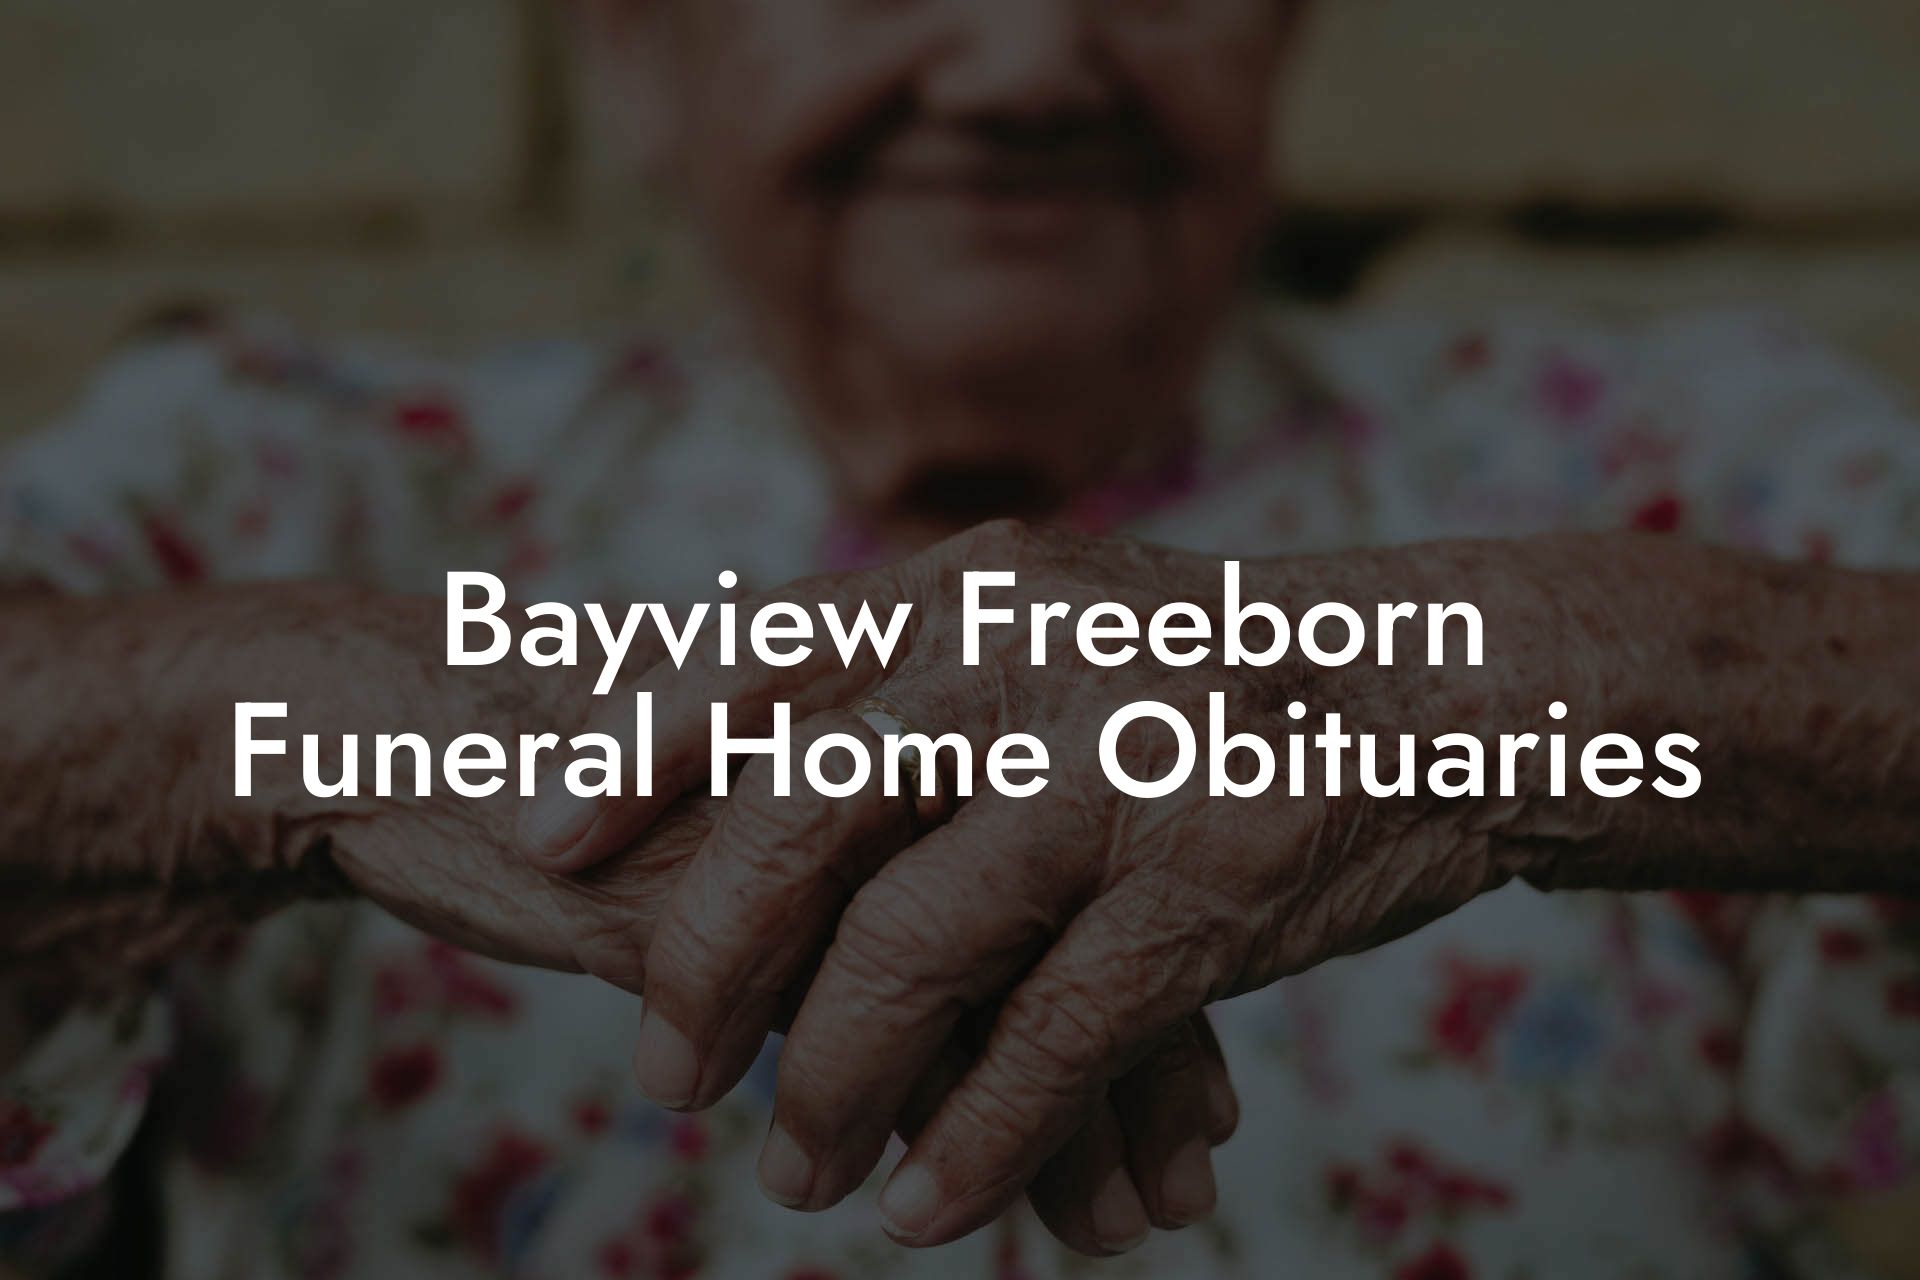 Bayview Freeborn Funeral Home Obituaries